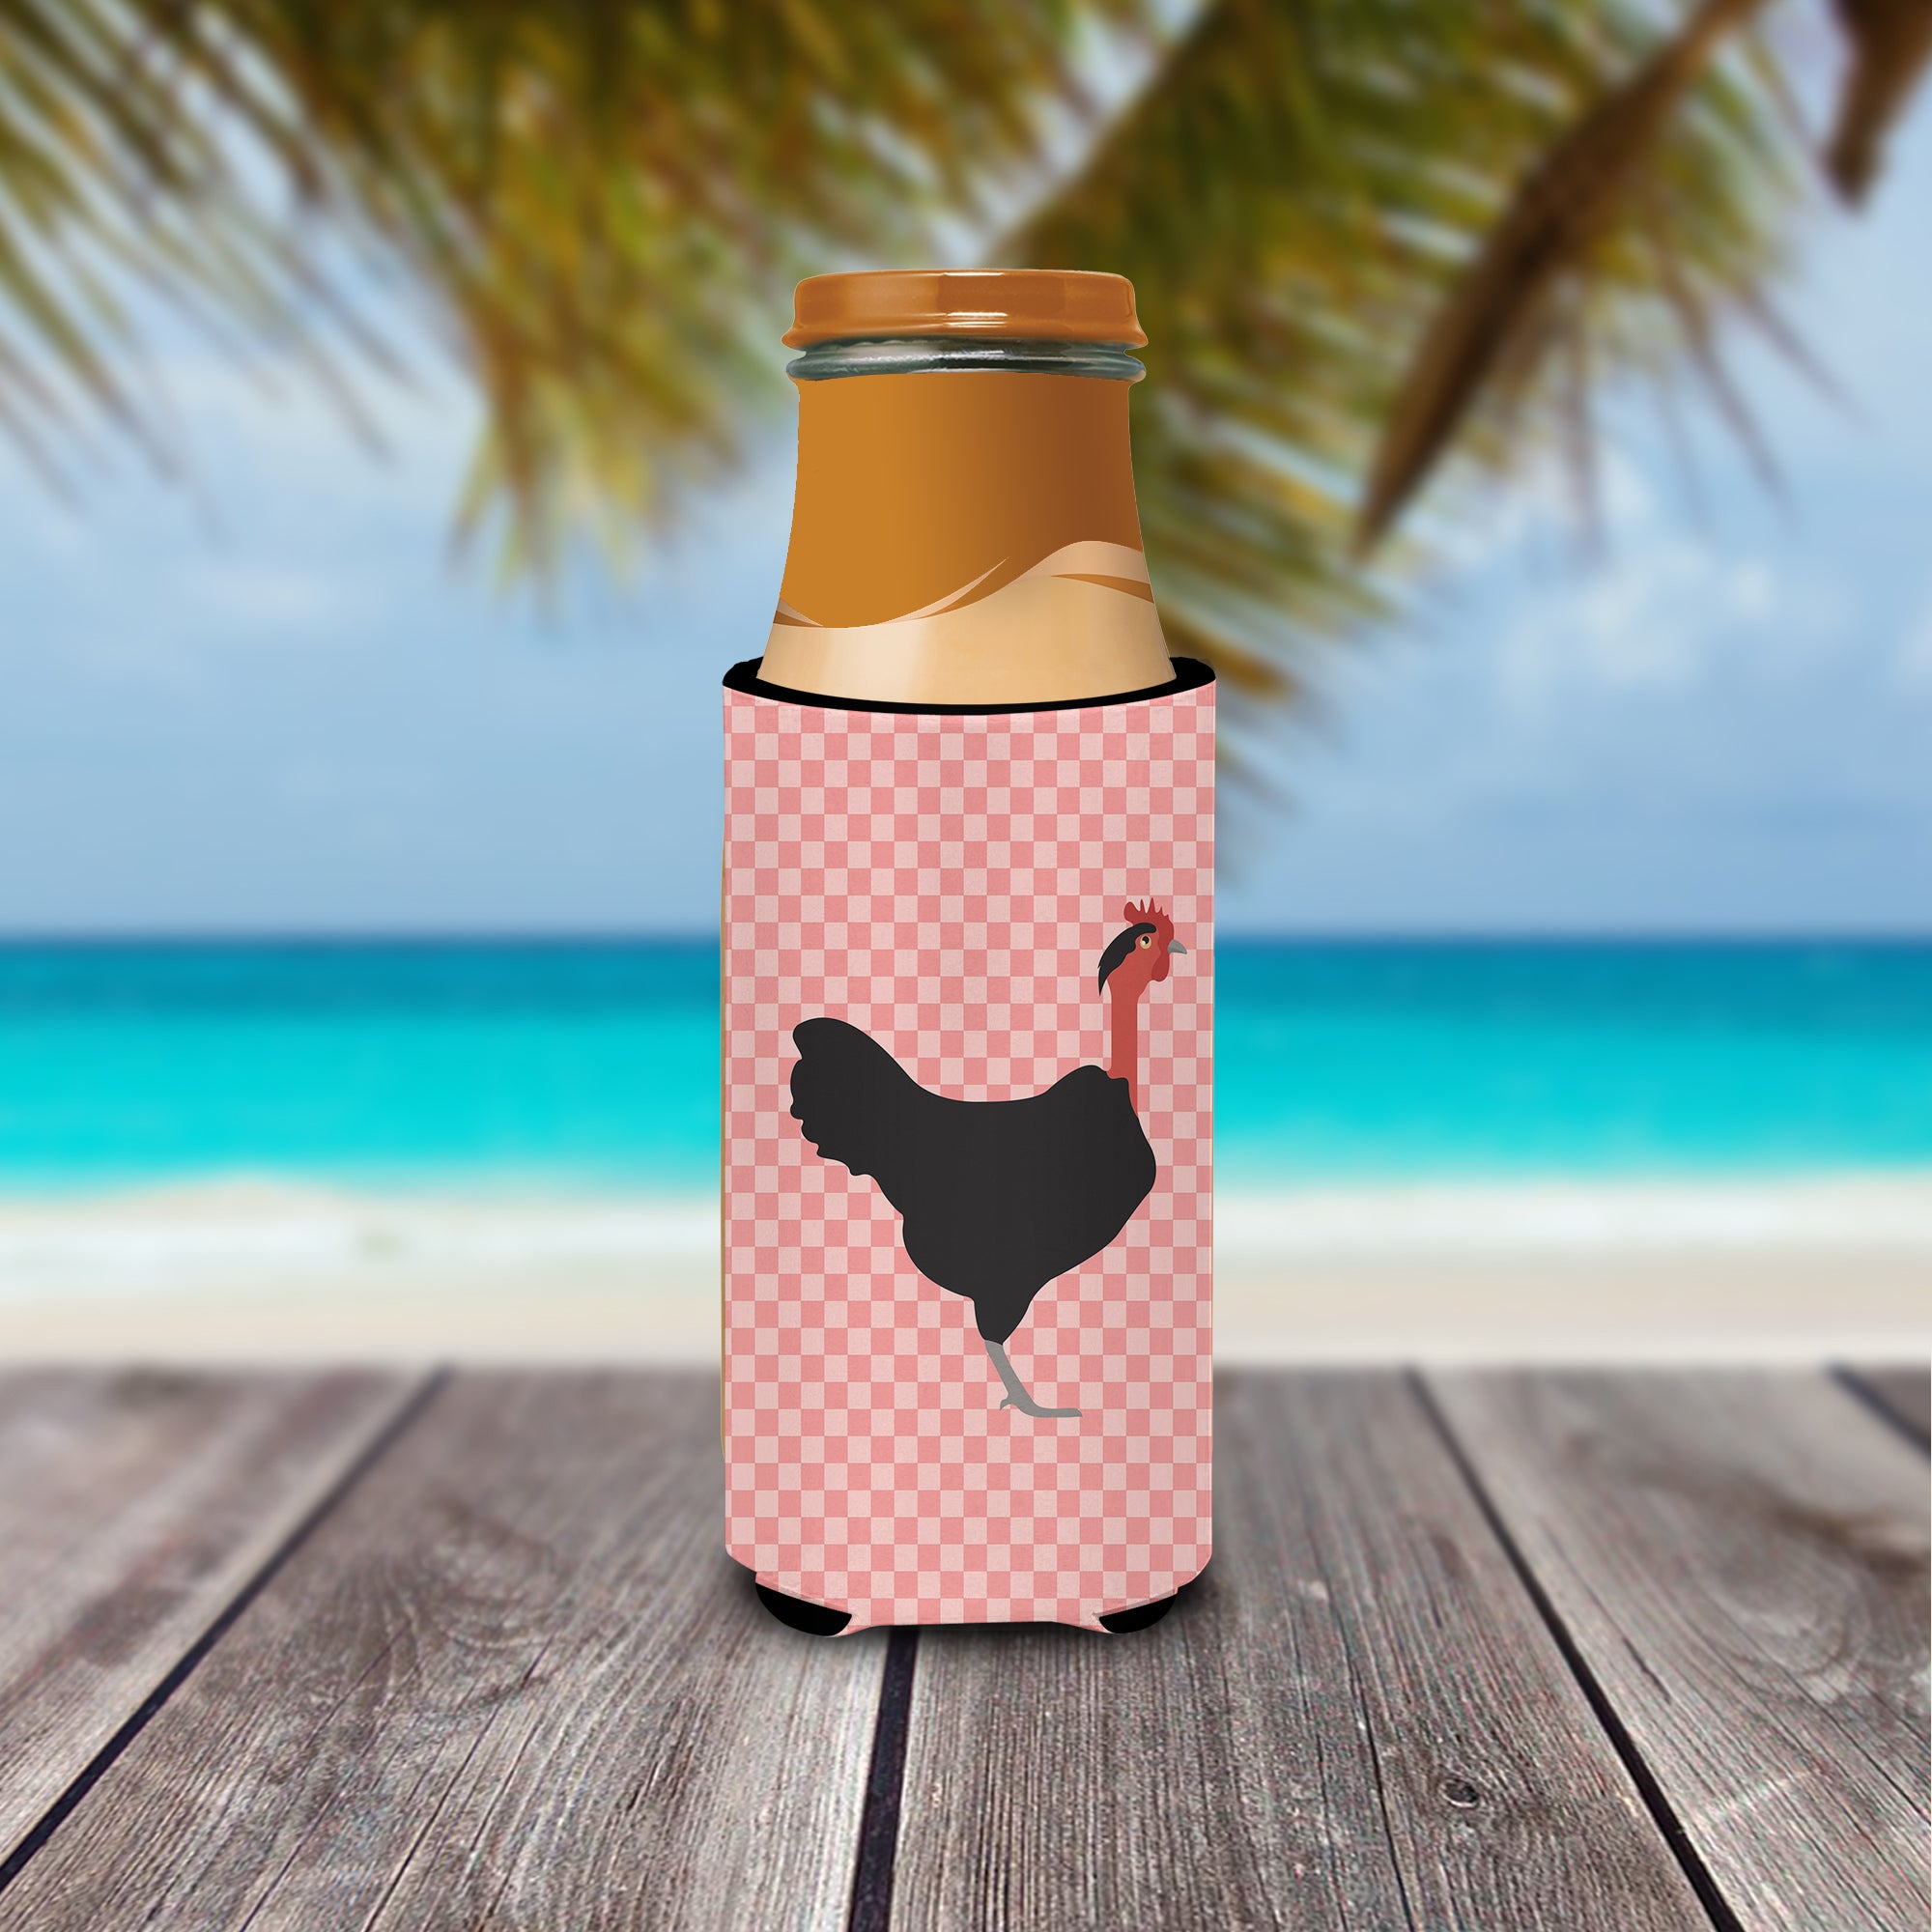 Naked Neck Chicken Pink Check  Ultra Hugger for slim cans